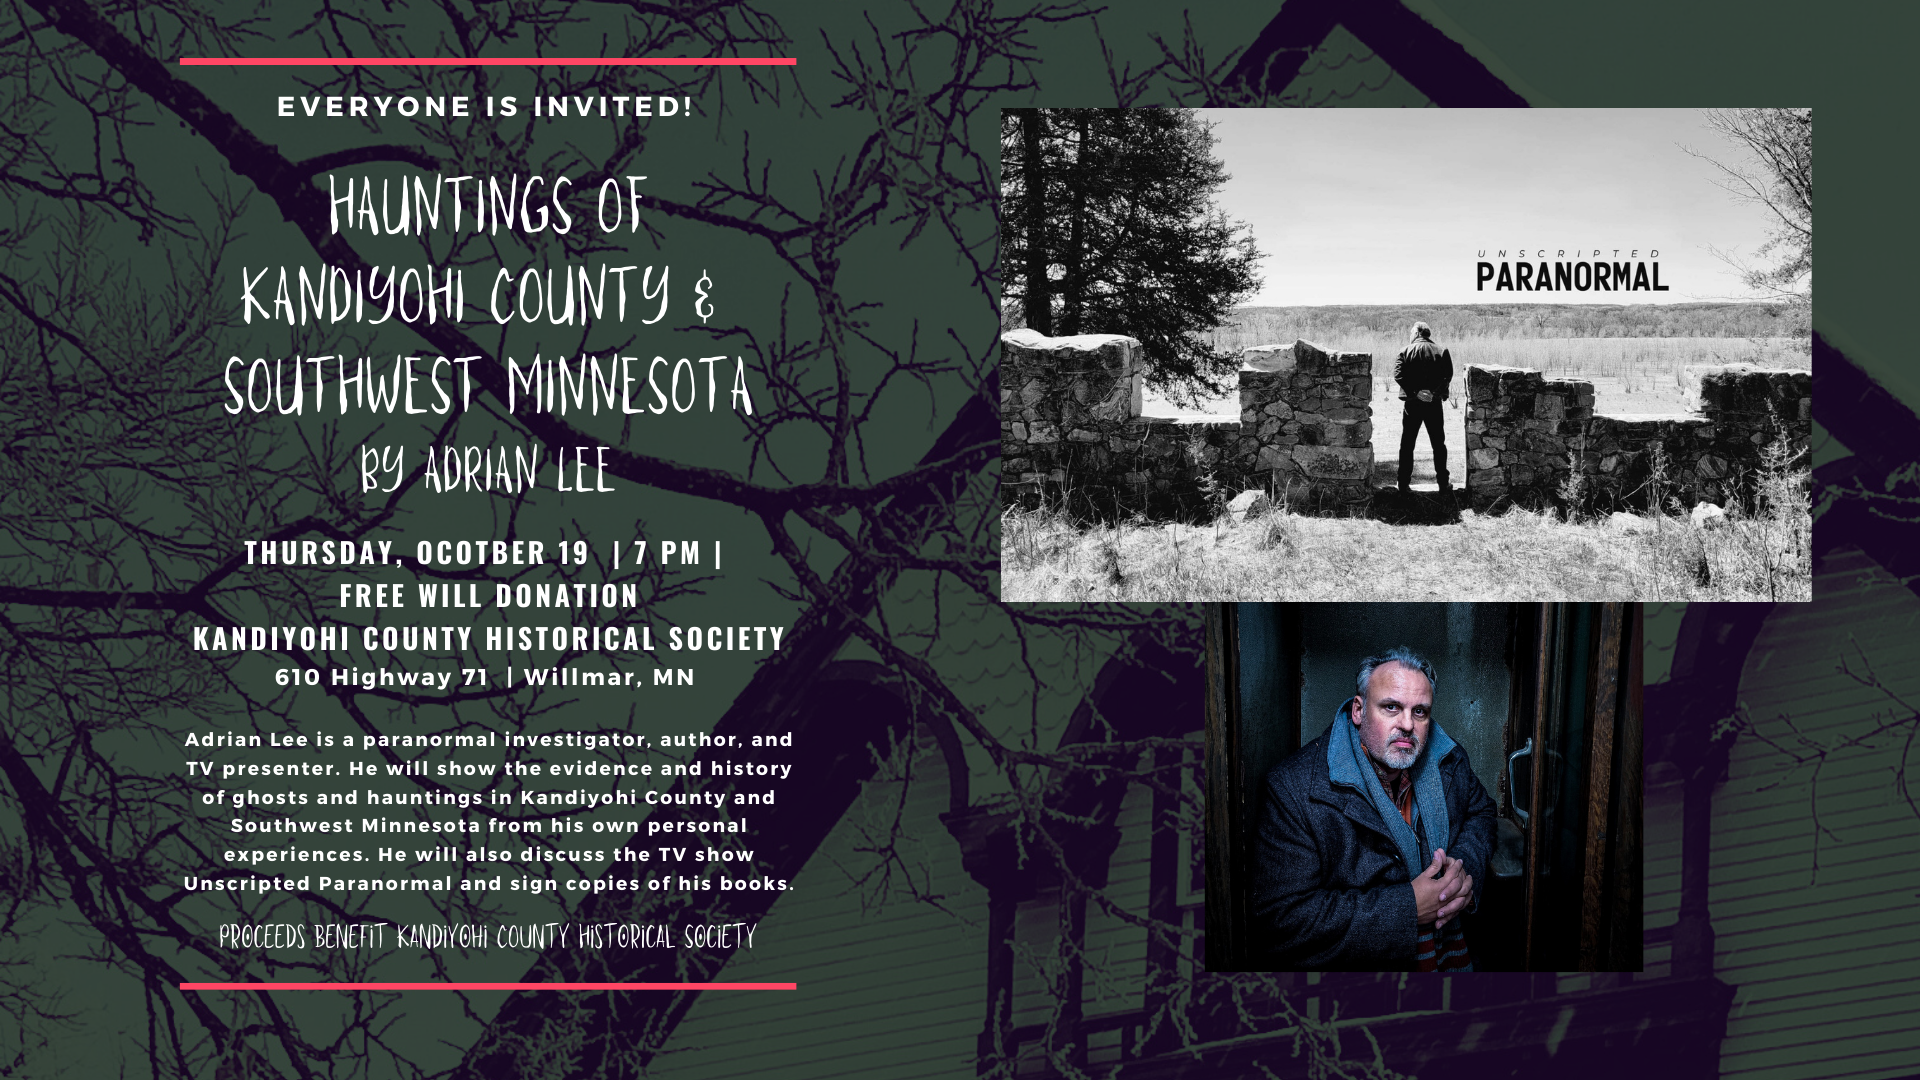 <h1 class="tribe-events-single-event-title">Hauntings of Kandiyohi County & Southwest Minnesota</h1>